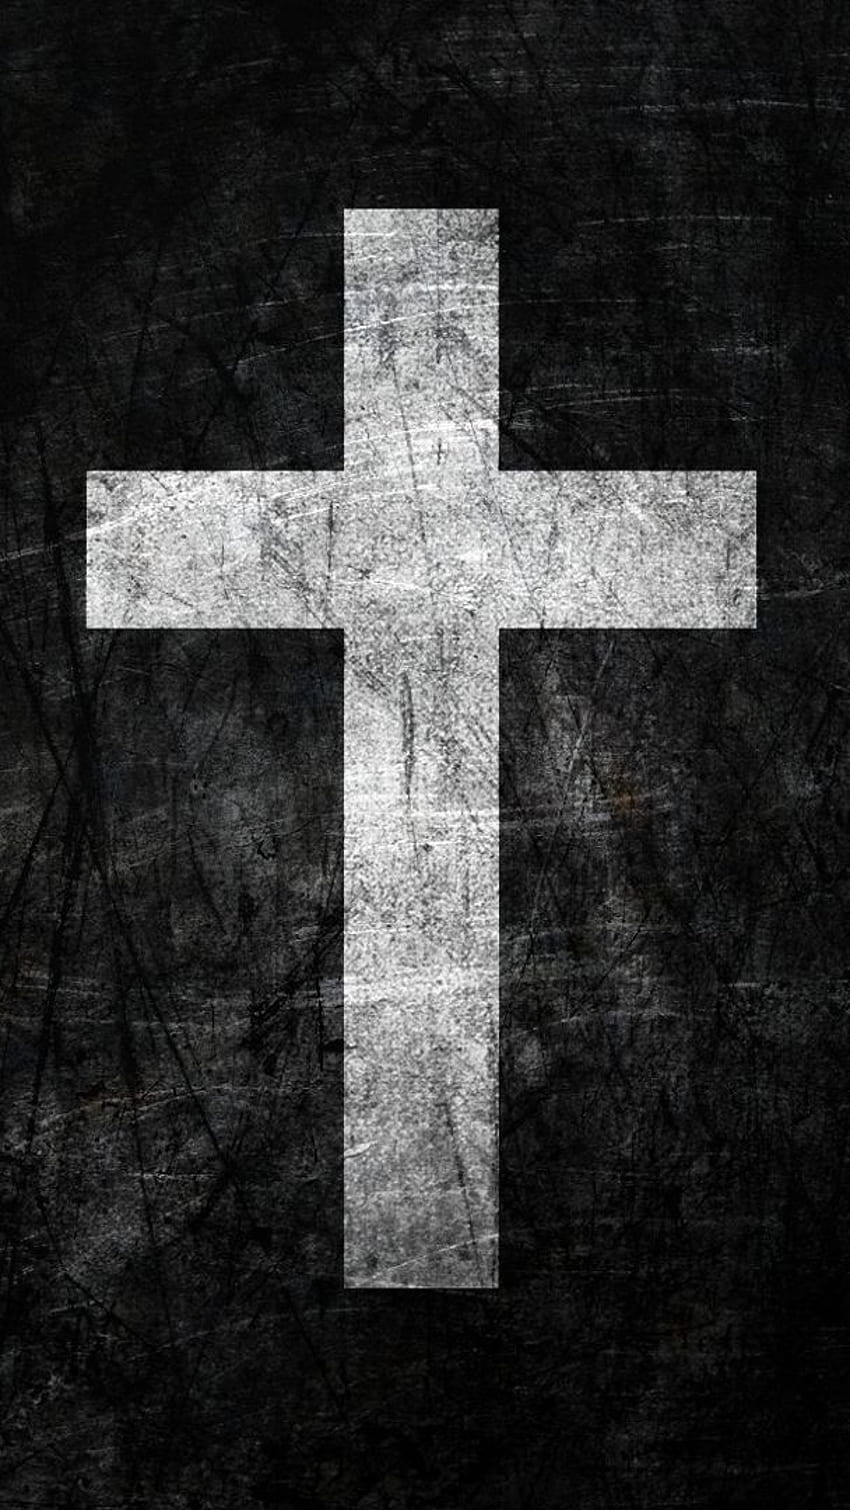 cool black and white cross drawings